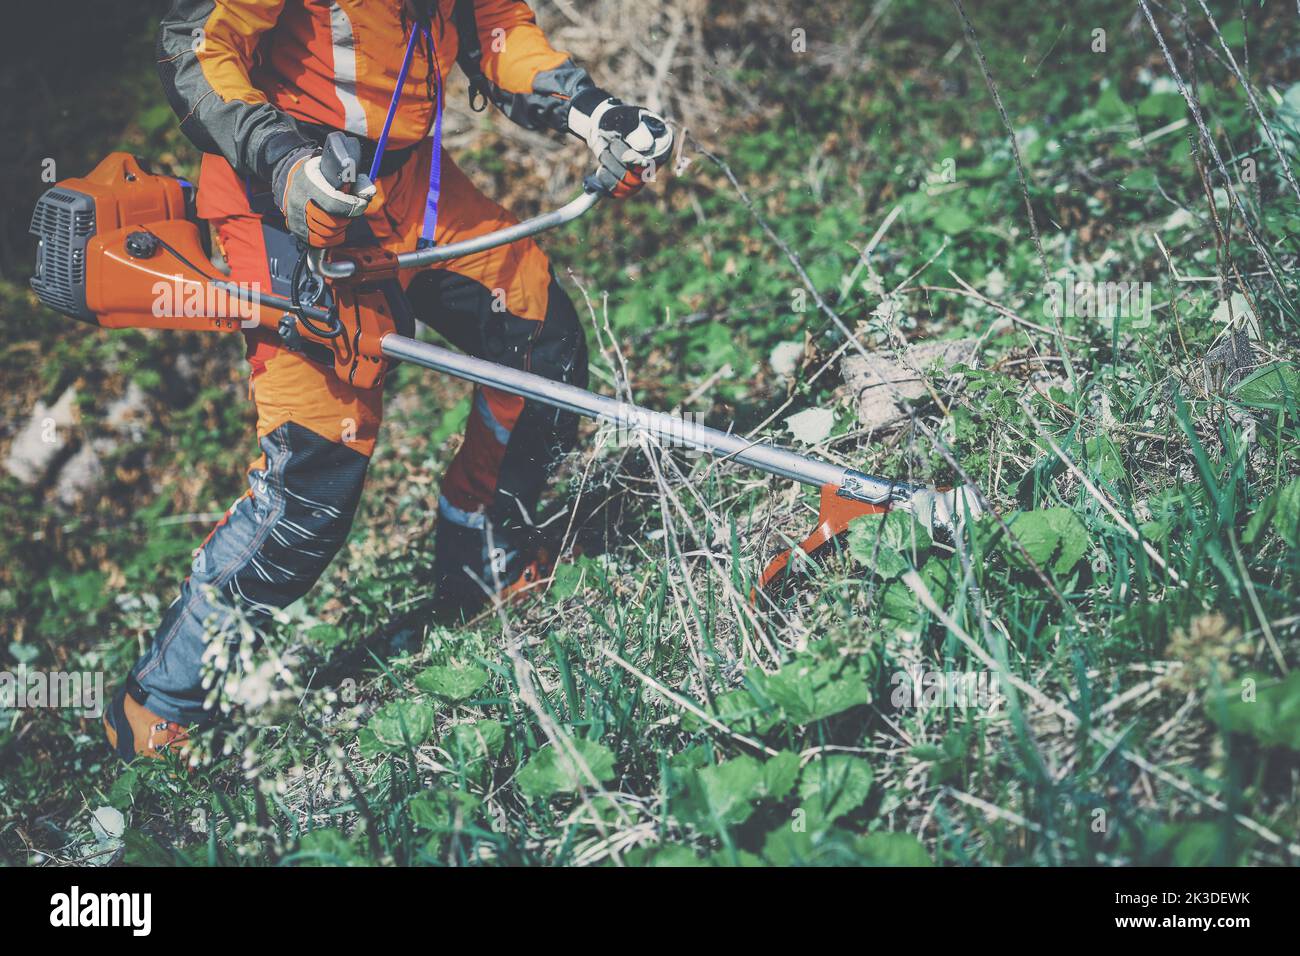 Man holding a brushcutter cut grass and brush. Lumberjack at work wears orange personal protective equipment. Gardener working outdoor in the forest. Stock Photo